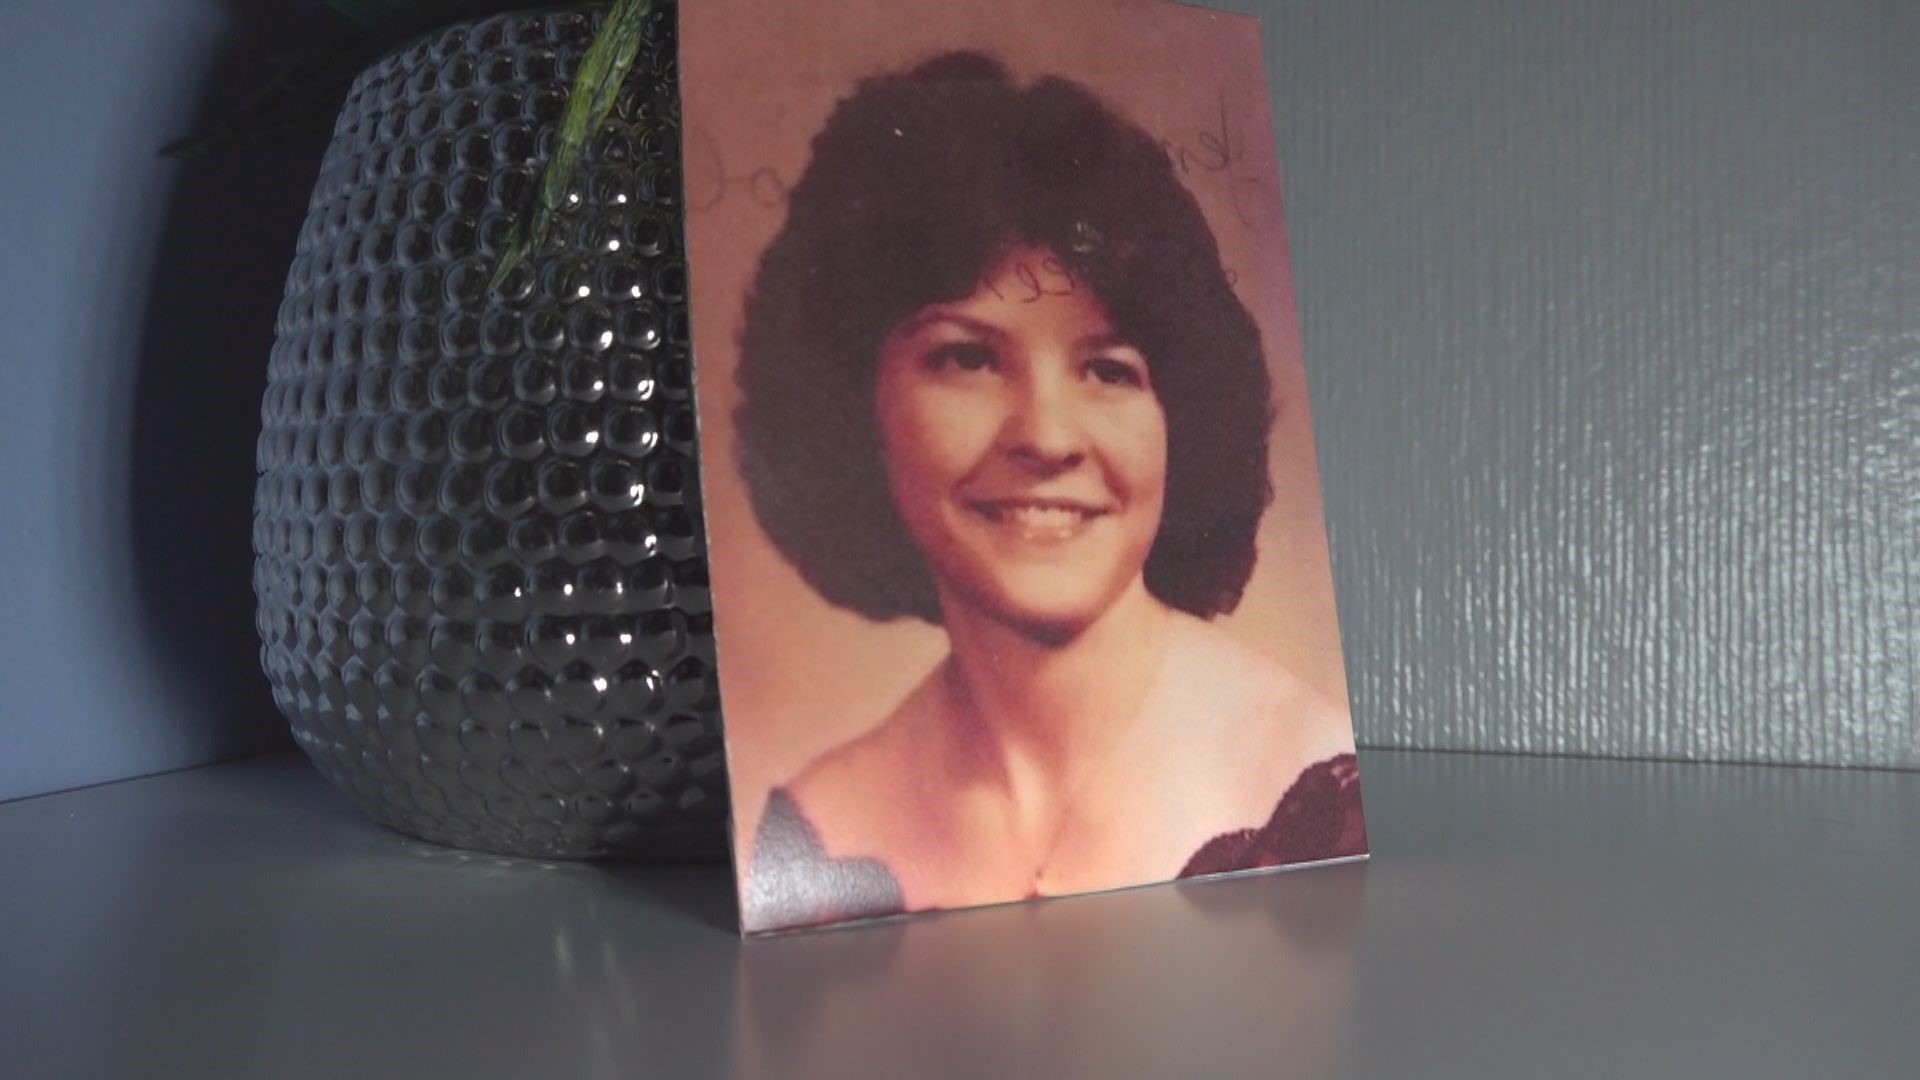 Carmen Croan was last seen at Graham Central Station in 1981, but her cold case has lived on for over four decades.